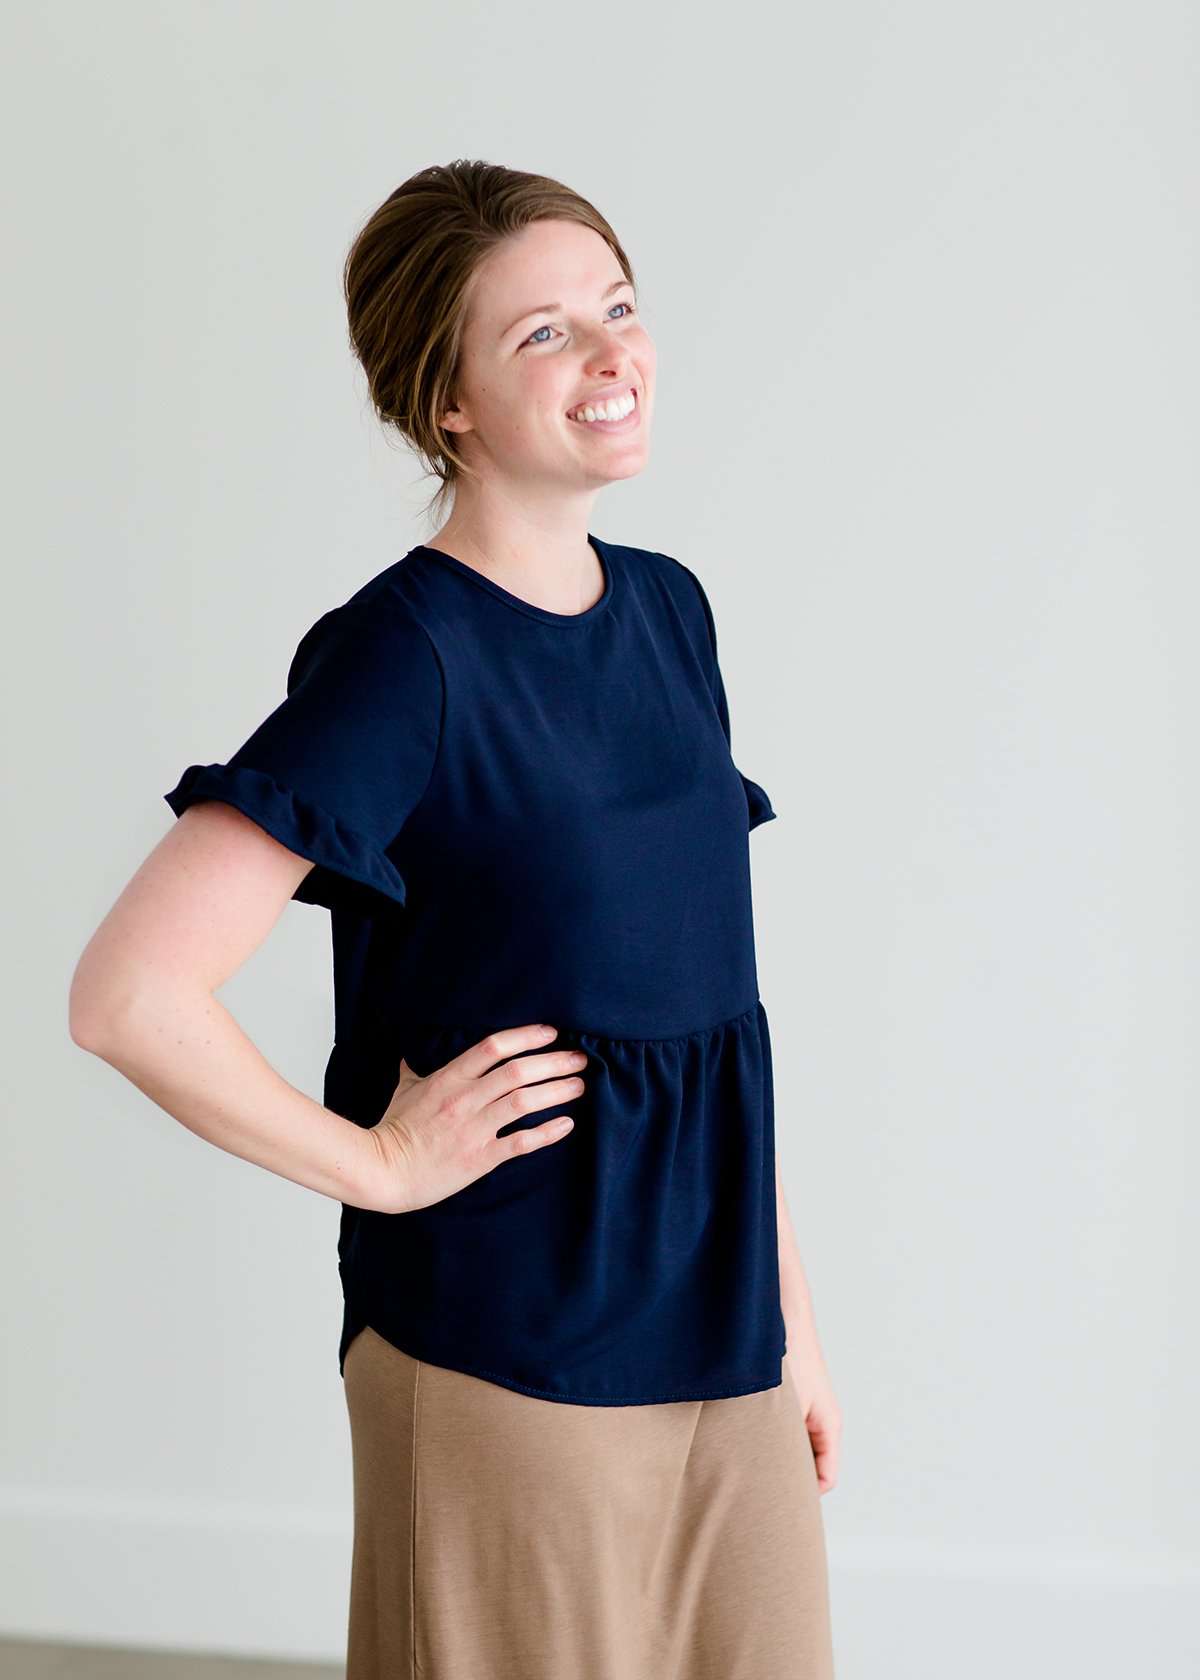 Woman wearing a navy peplum baby doll top that has ruffle details on the sleeves.